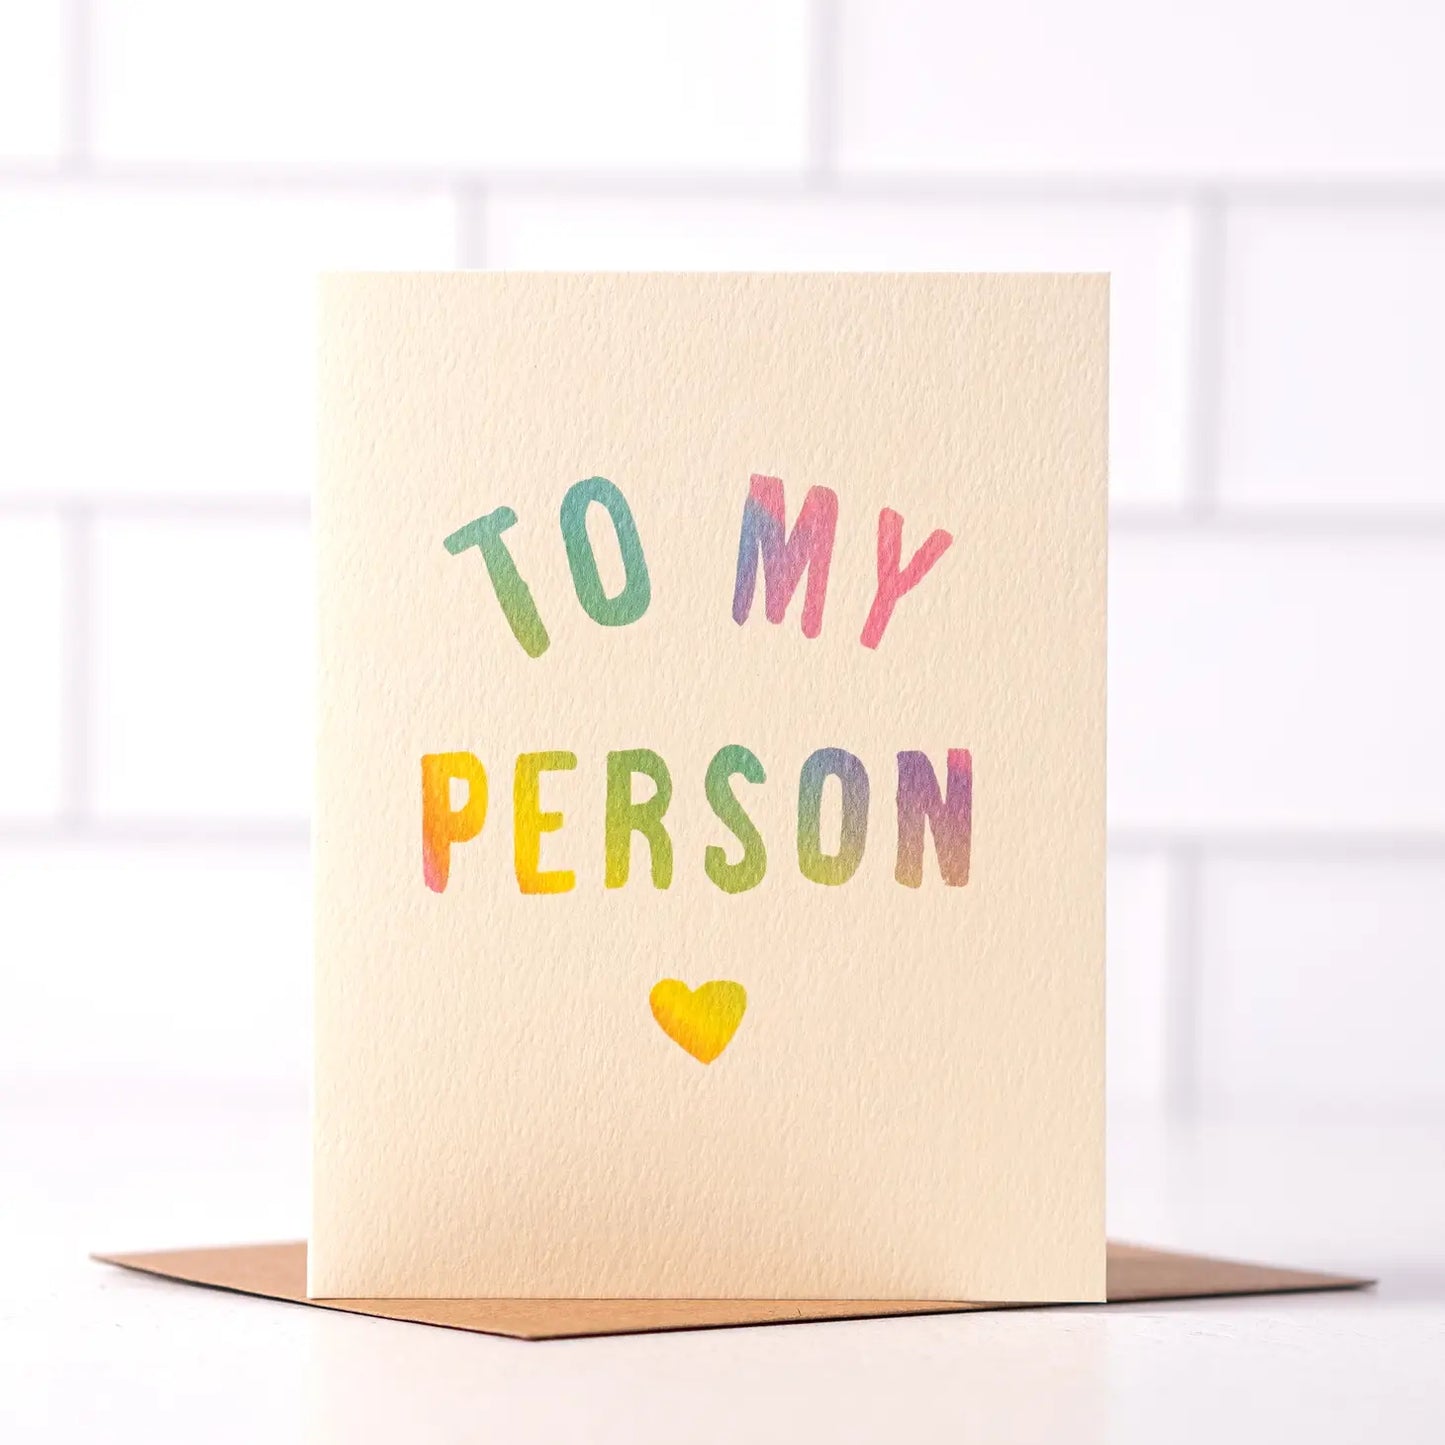 To My Person Card